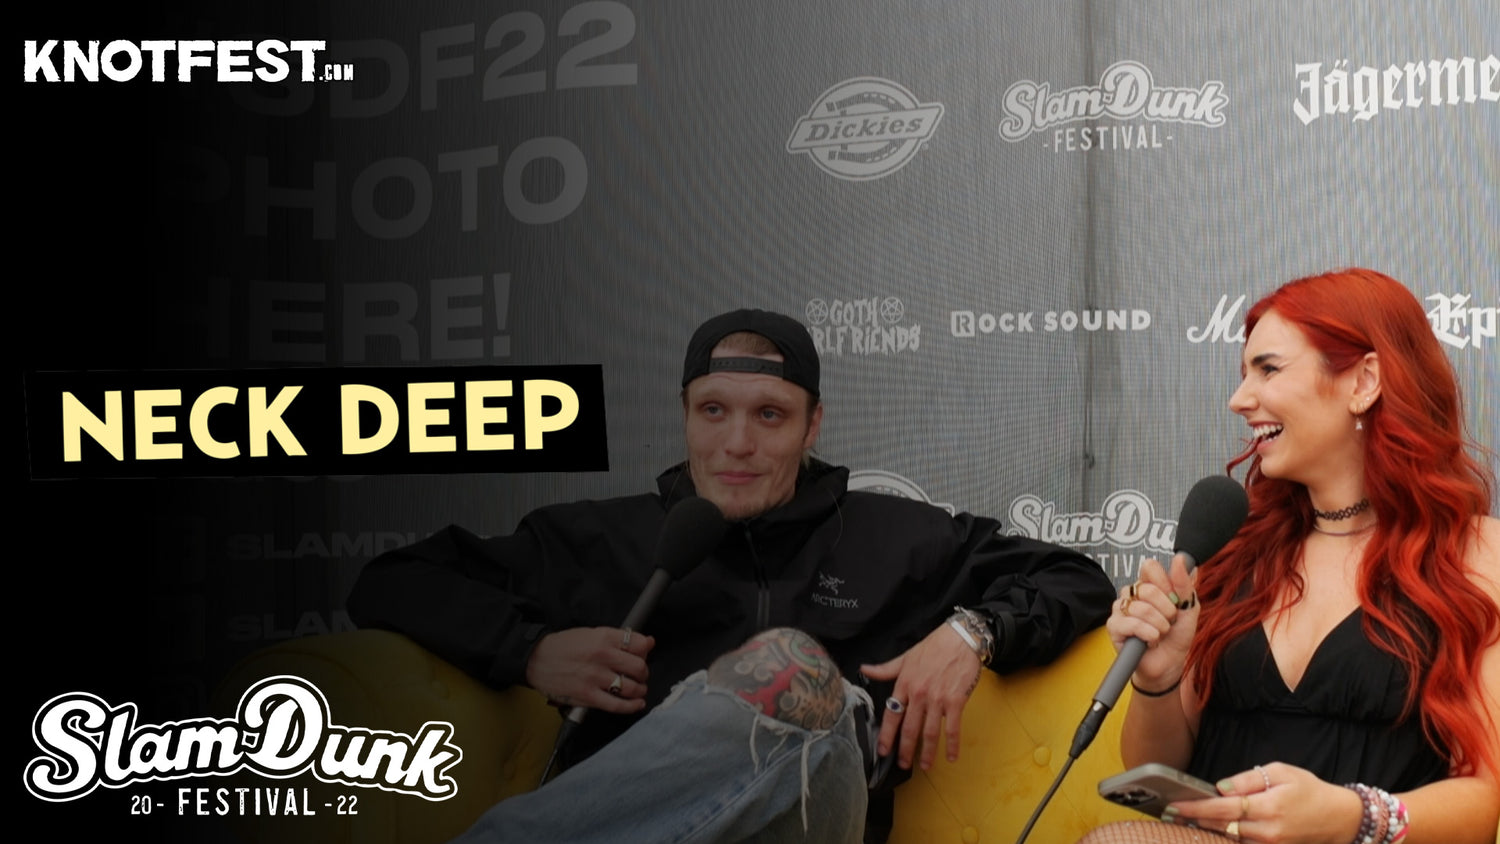 Neck Deep: "STFU" Boris Johnson, Going from Locals to Headliners at Slam Dunk, Wrestling & More